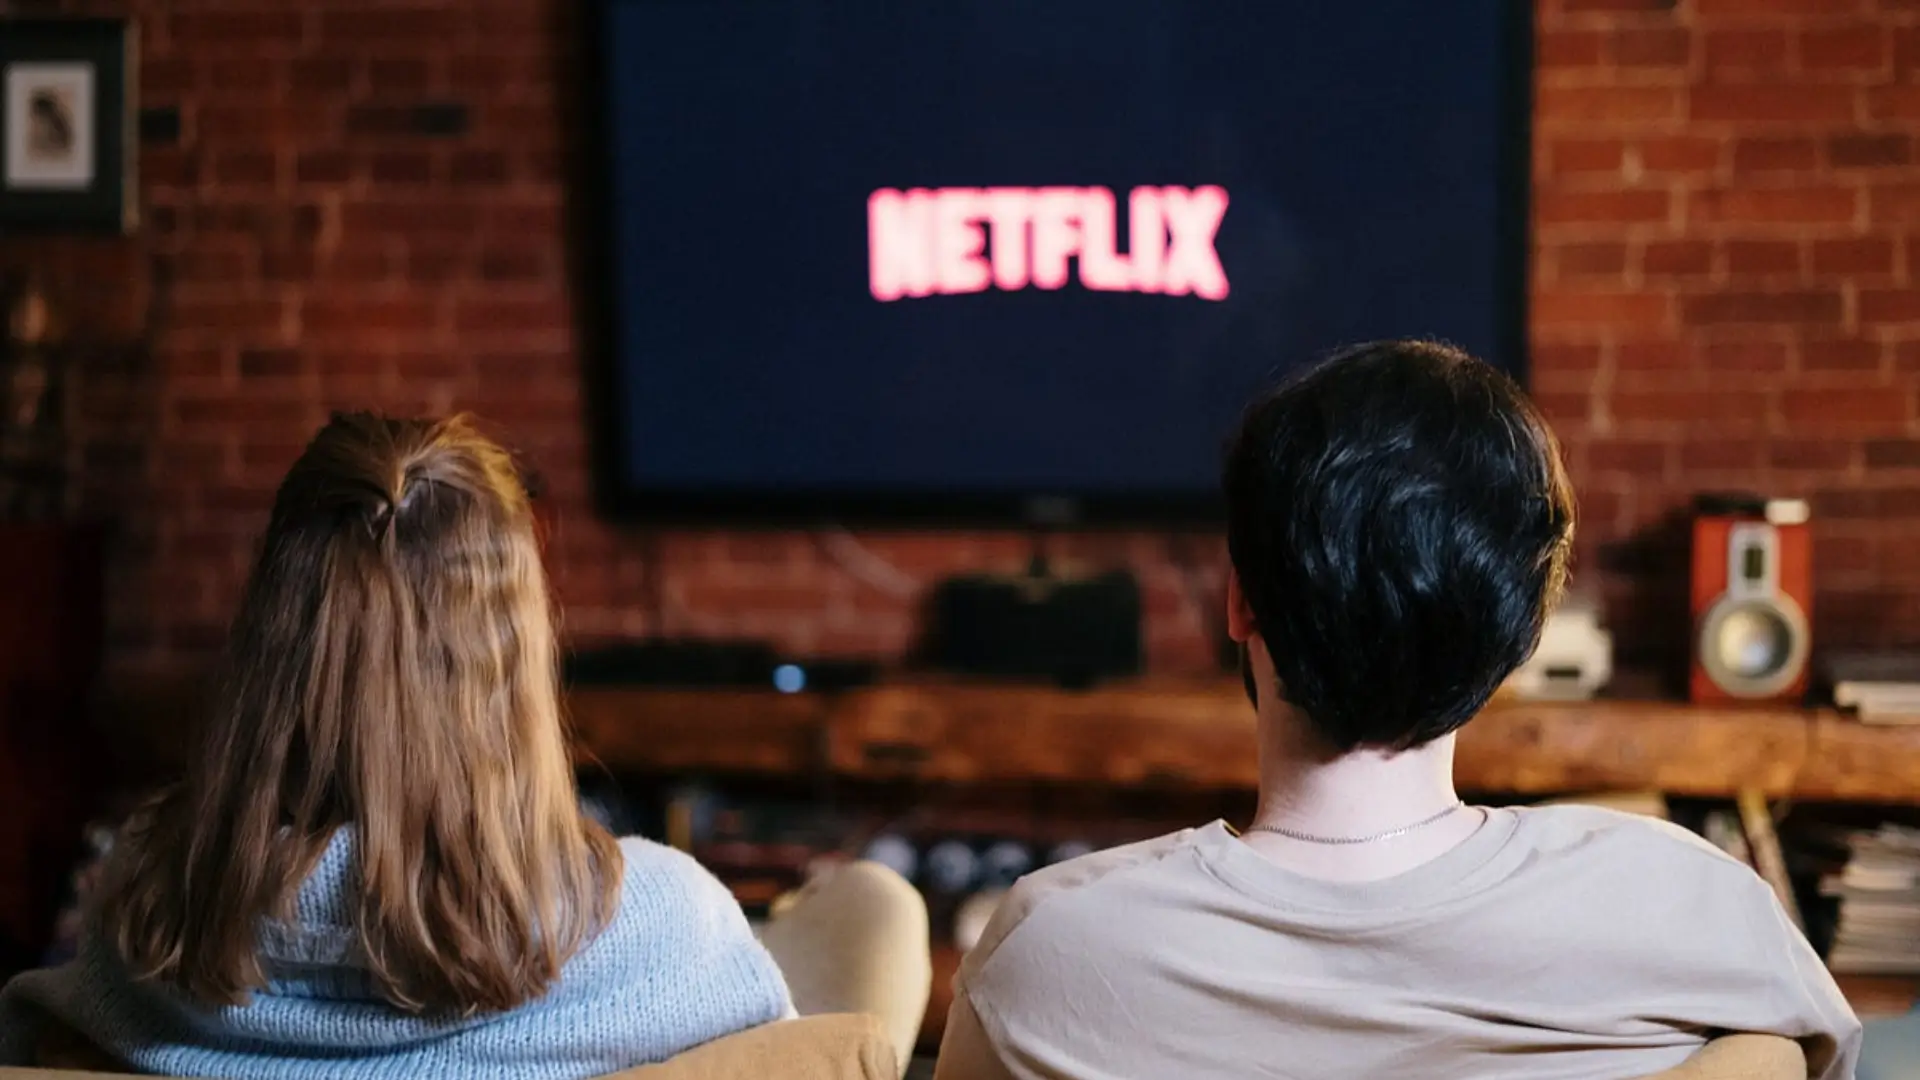 Best Tv Shows for couples on Netflix